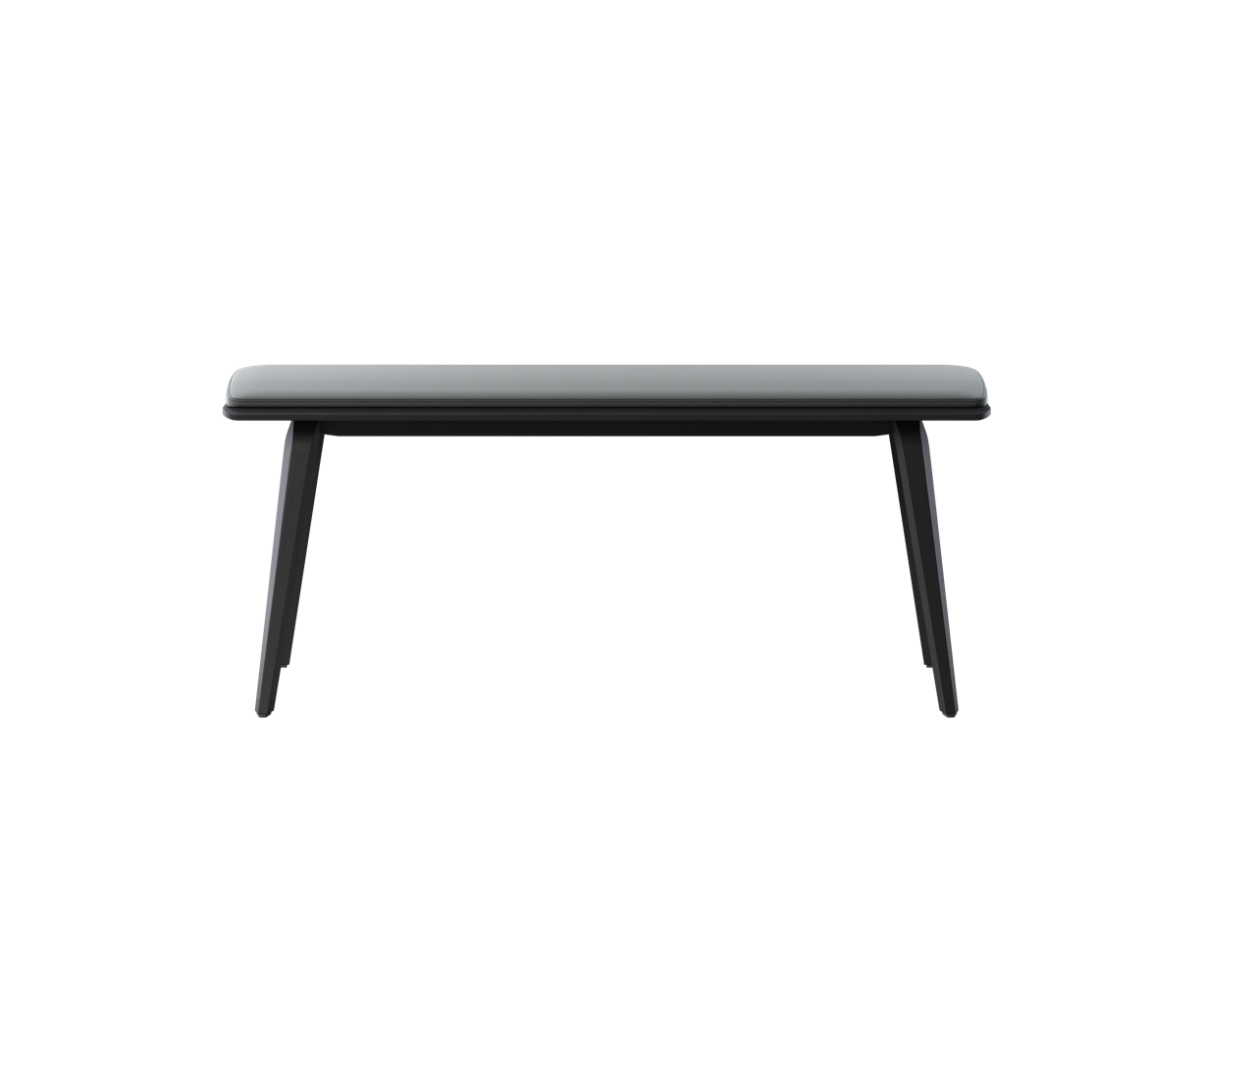 OCEE&FOUR – Stools & Benches – Share Bench – Packshot Image(21) Large